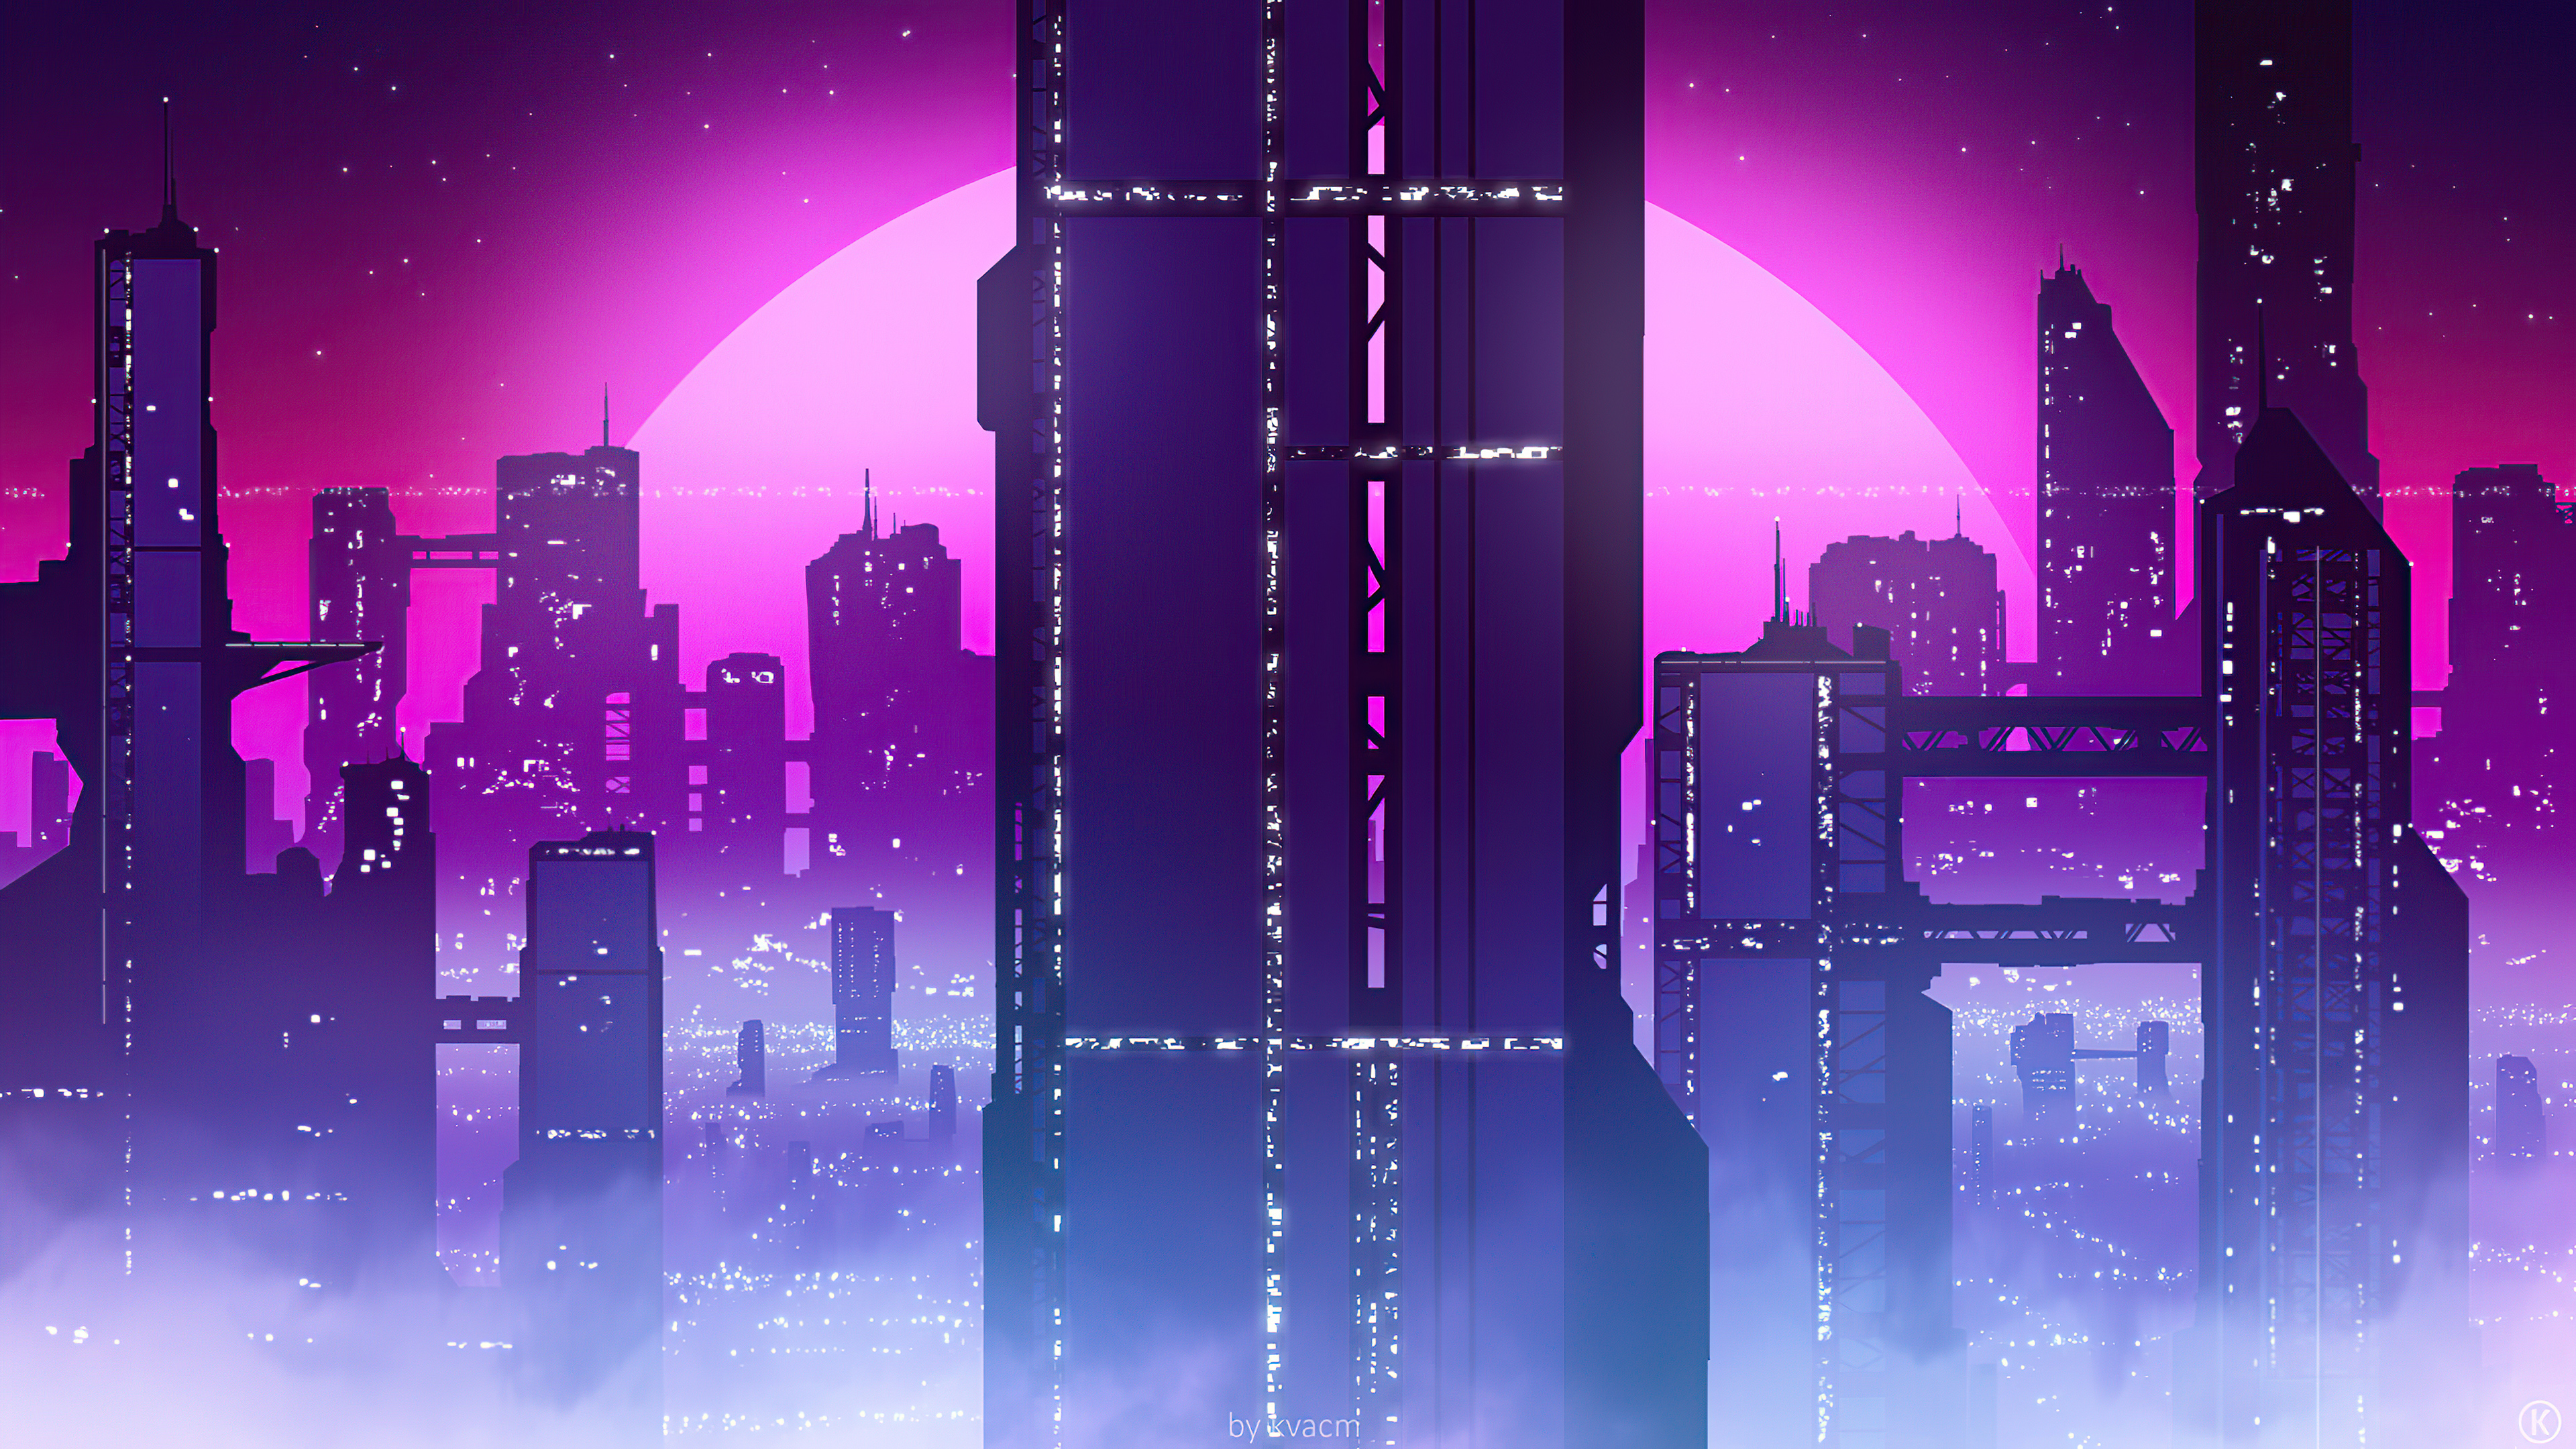 Details 70+ synthwave wallpaper 4k latest - in.cdgdbentre